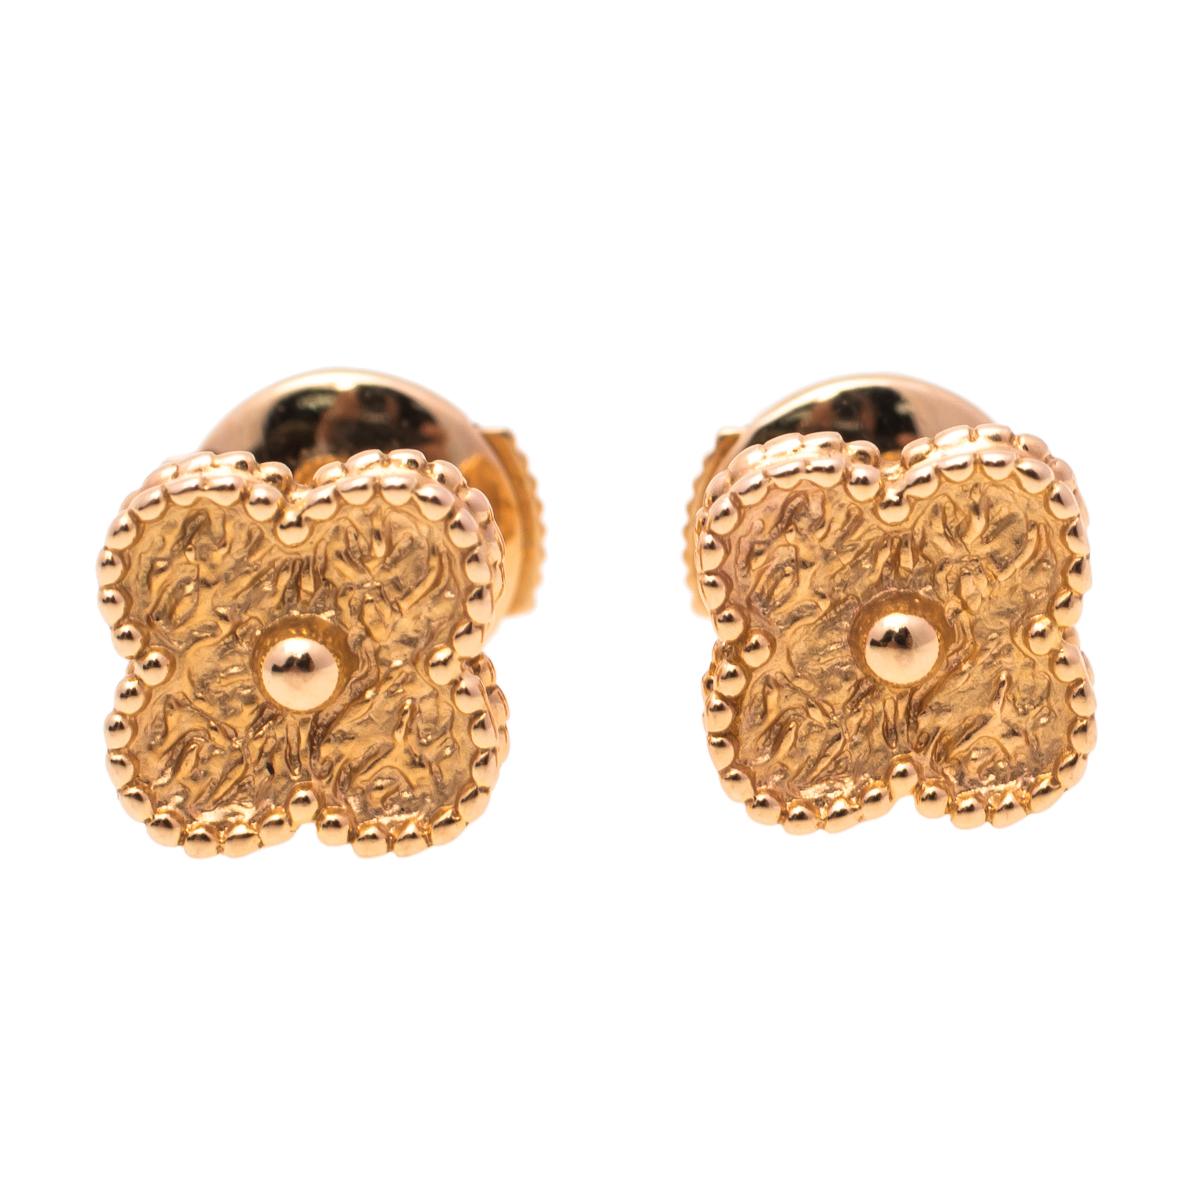 The Alhambra creations from Van Cleef & Arpels have been bringing classic style to women around the world for years that to this day, they are highly coveted. These lovely earrings from the Sweet Alhambra collection come crafted from 18K rose gold